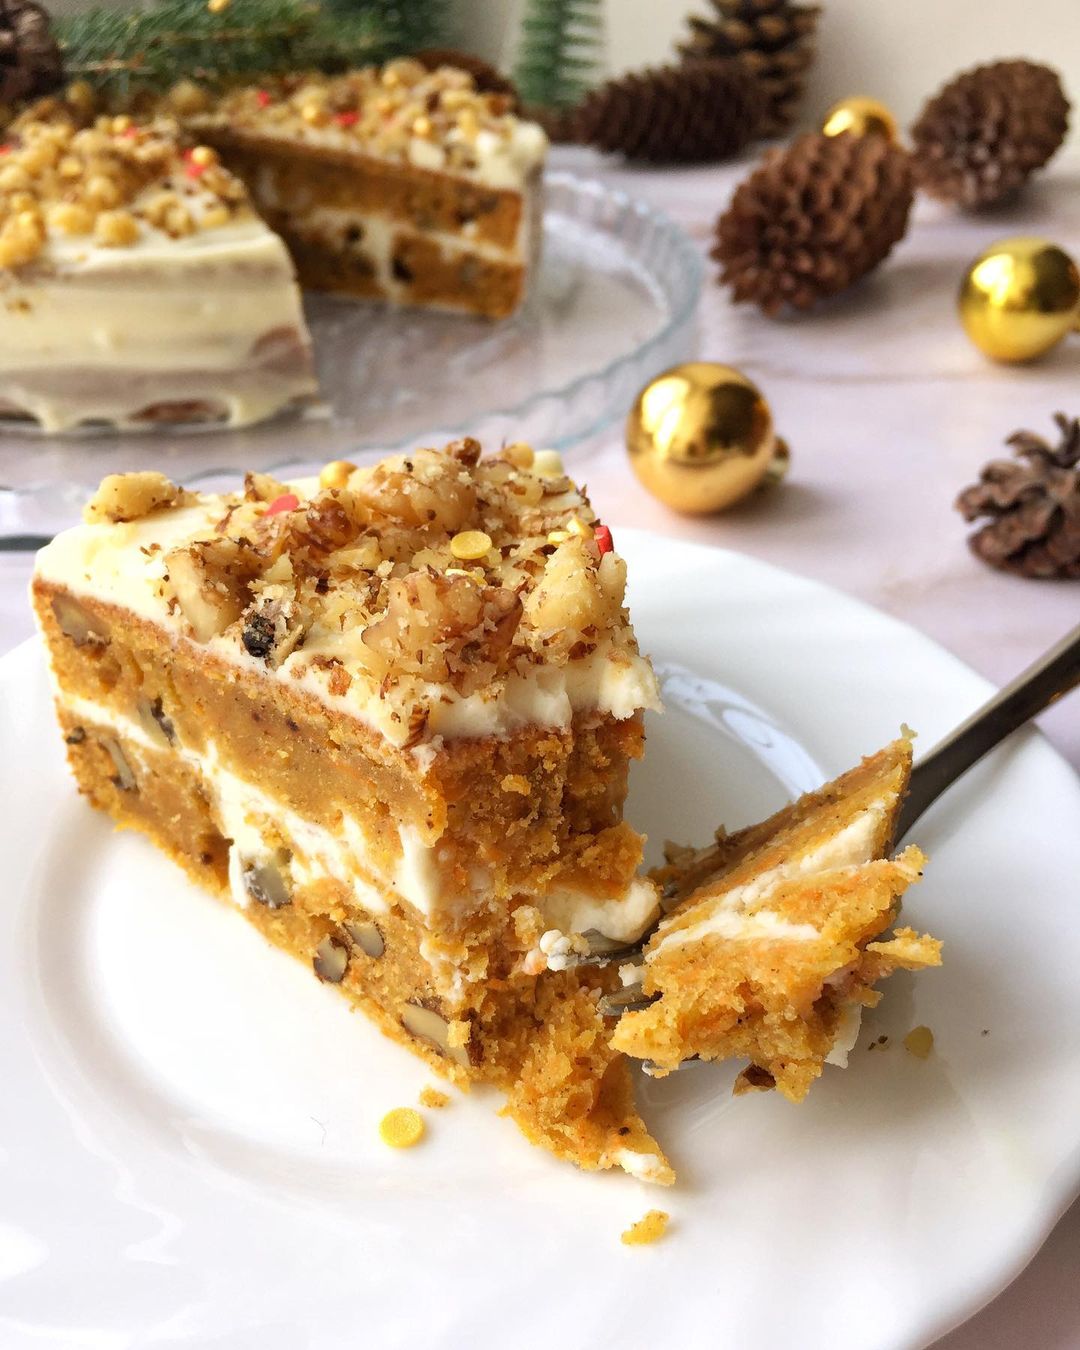 Spicy Christmas carrot cake with walnuts